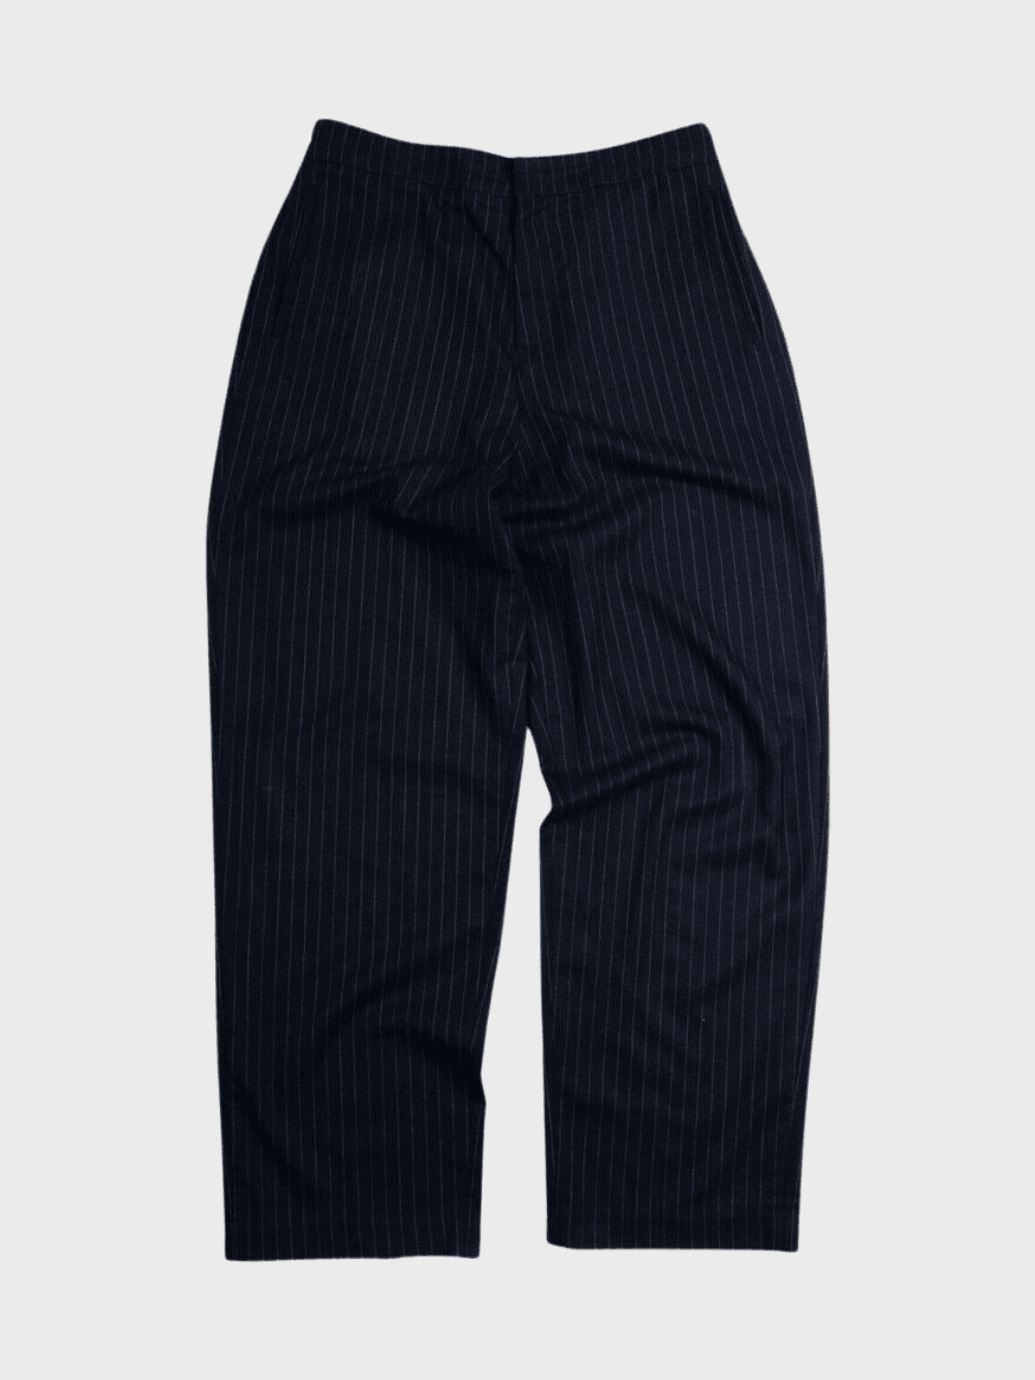 New Amsterdam Surf Association After Trouser in Pinstripe Navy